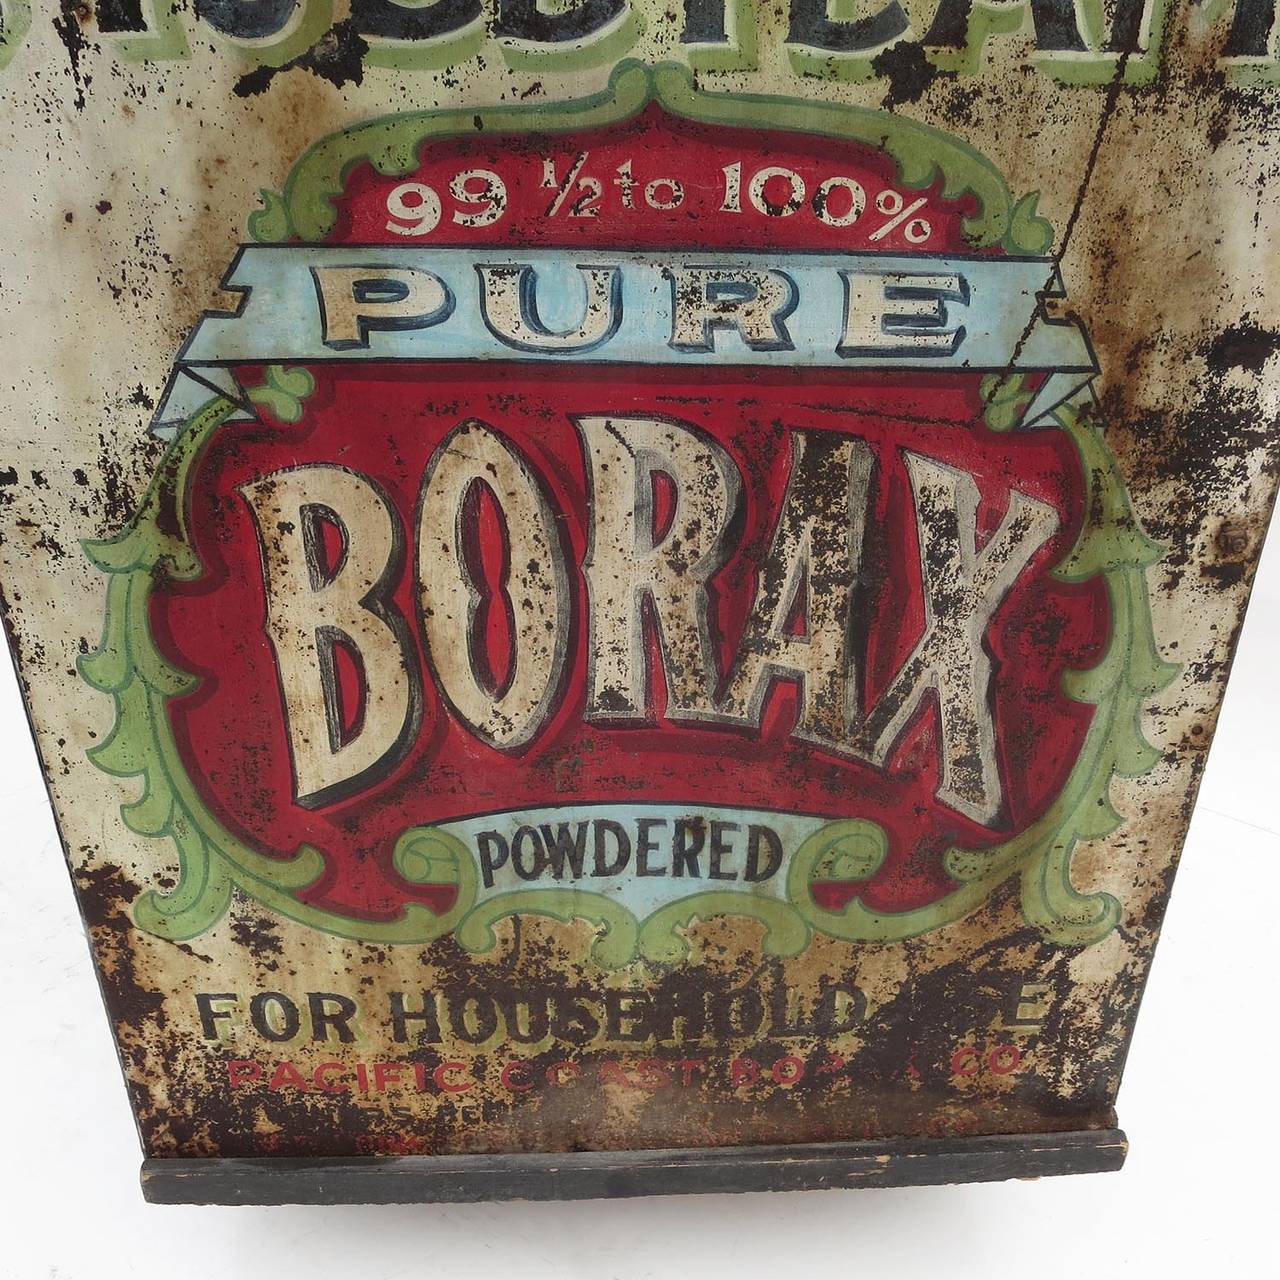 American Borax Storage Cabinet from the Estate of Roy Rogers